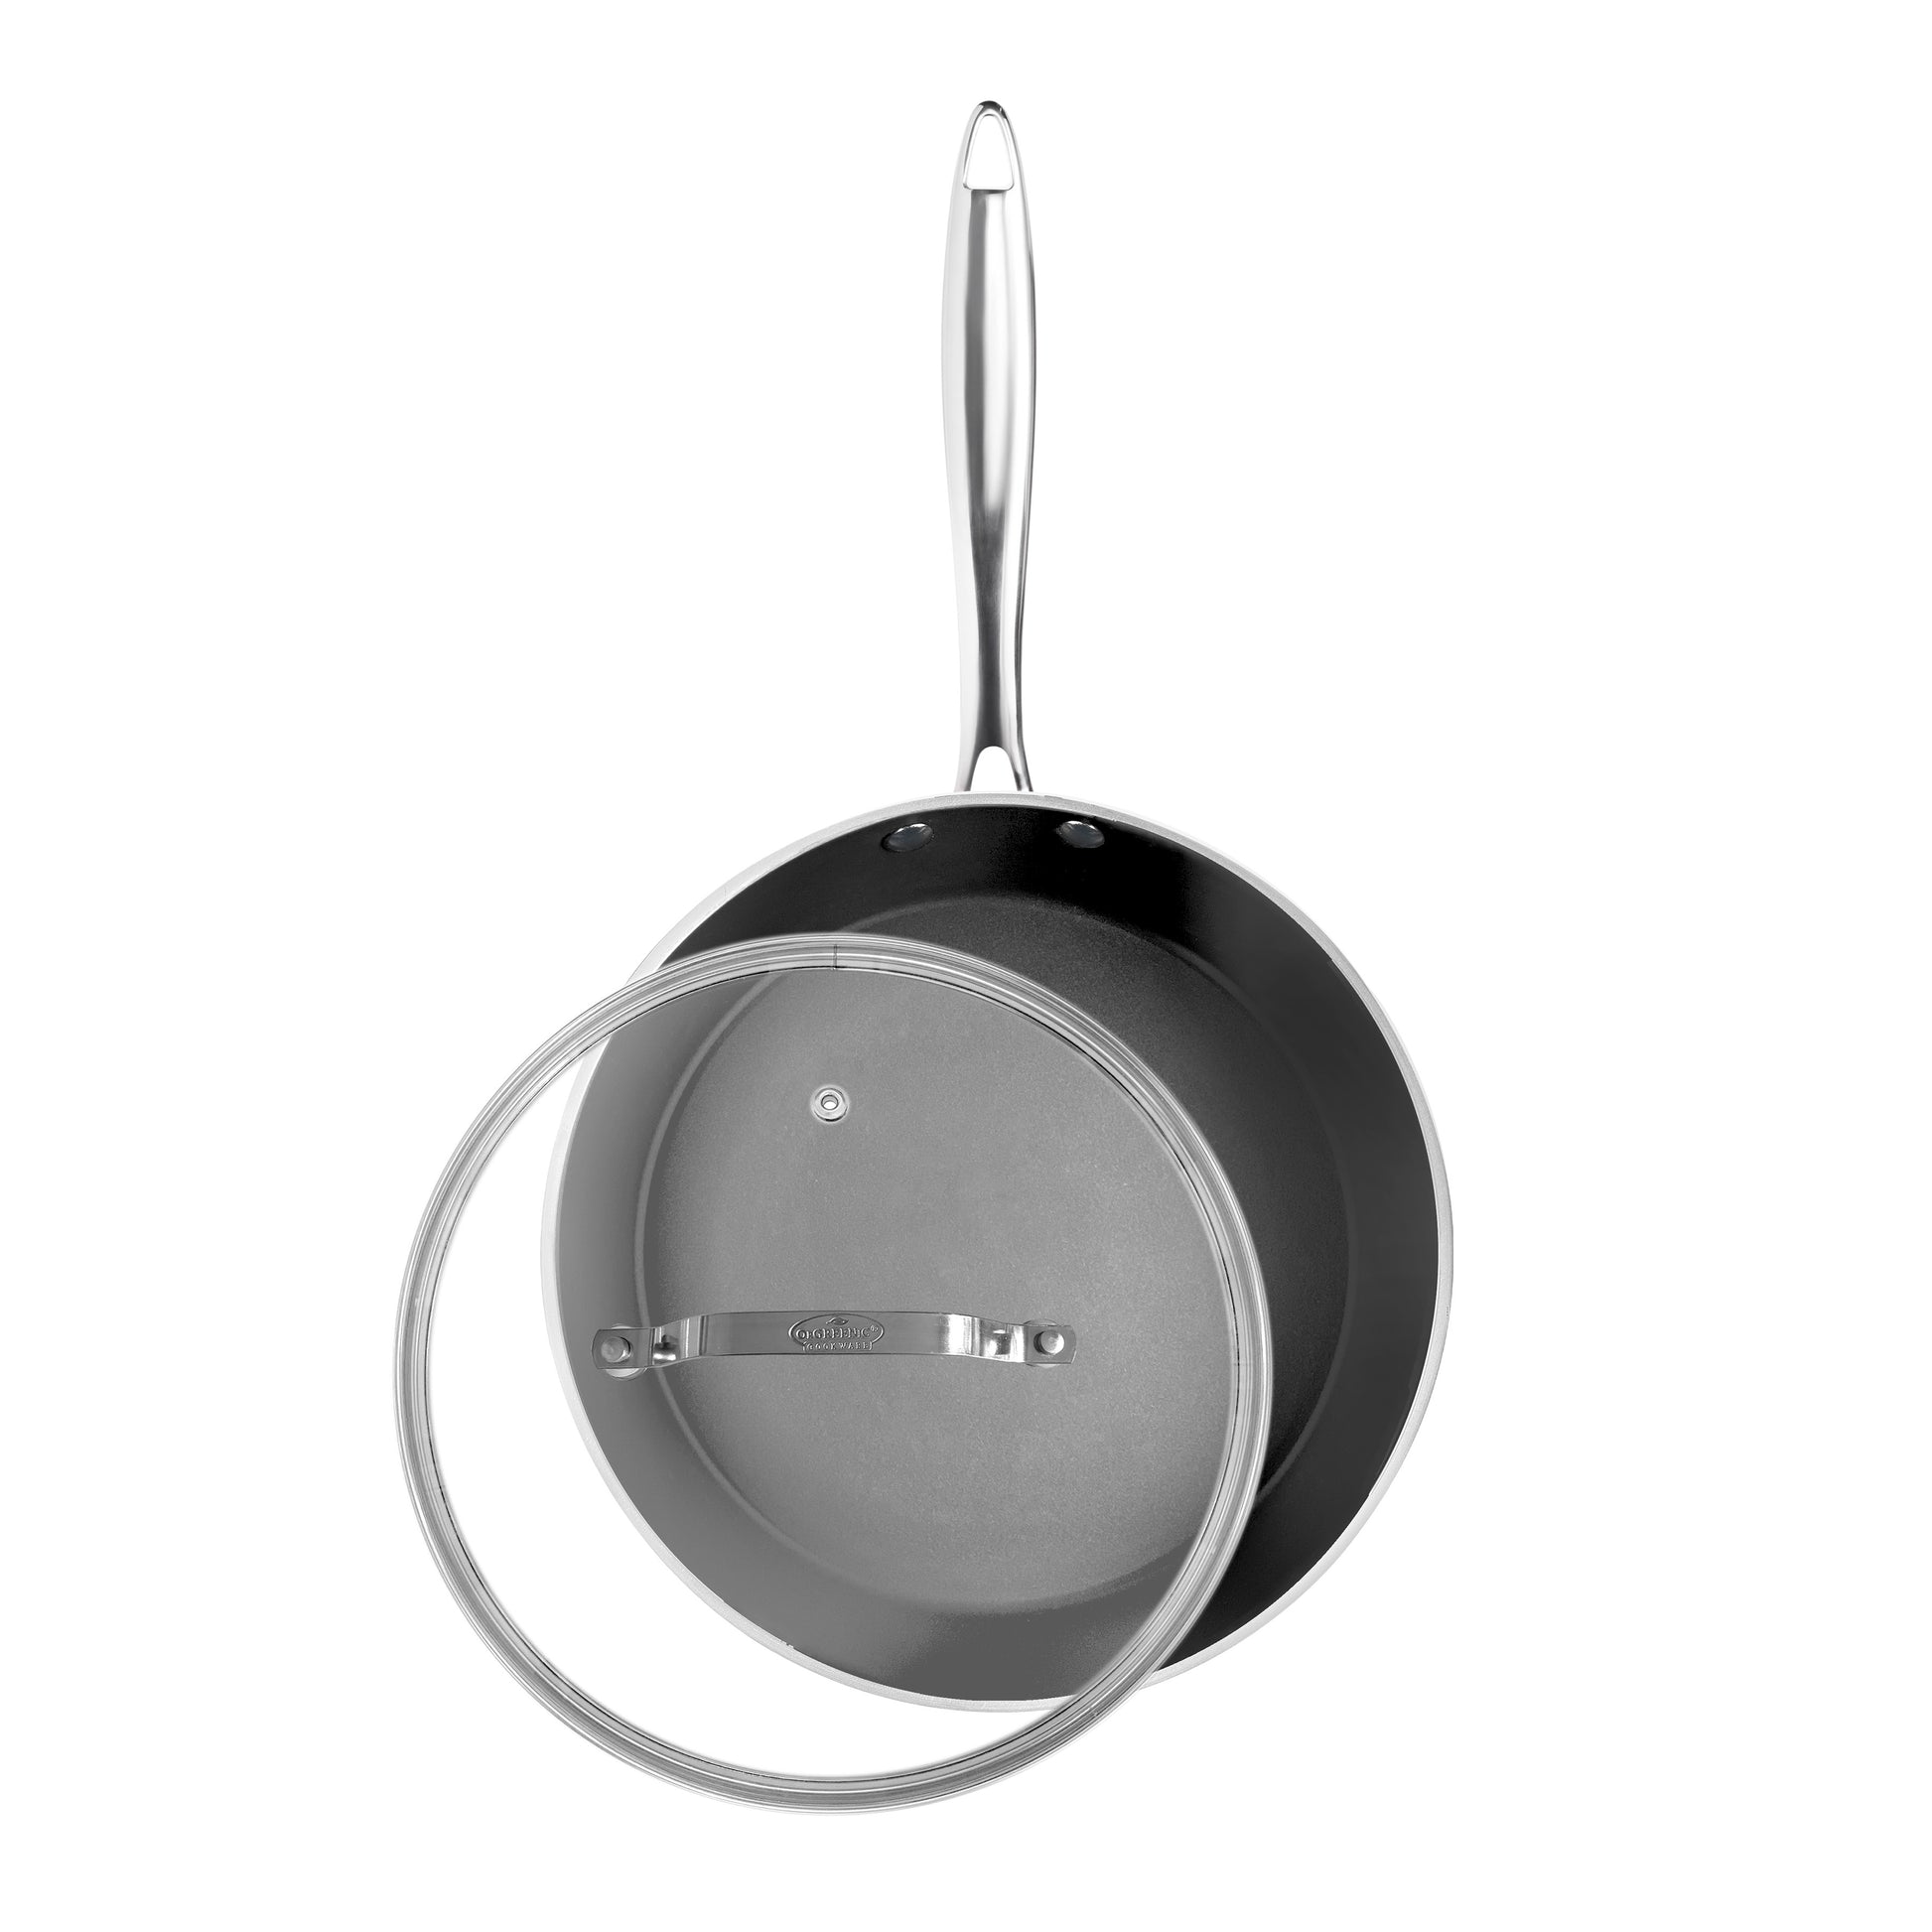 9.5 Pressed Aluminum Fry Pan - Sapphire Non-Stick Induction